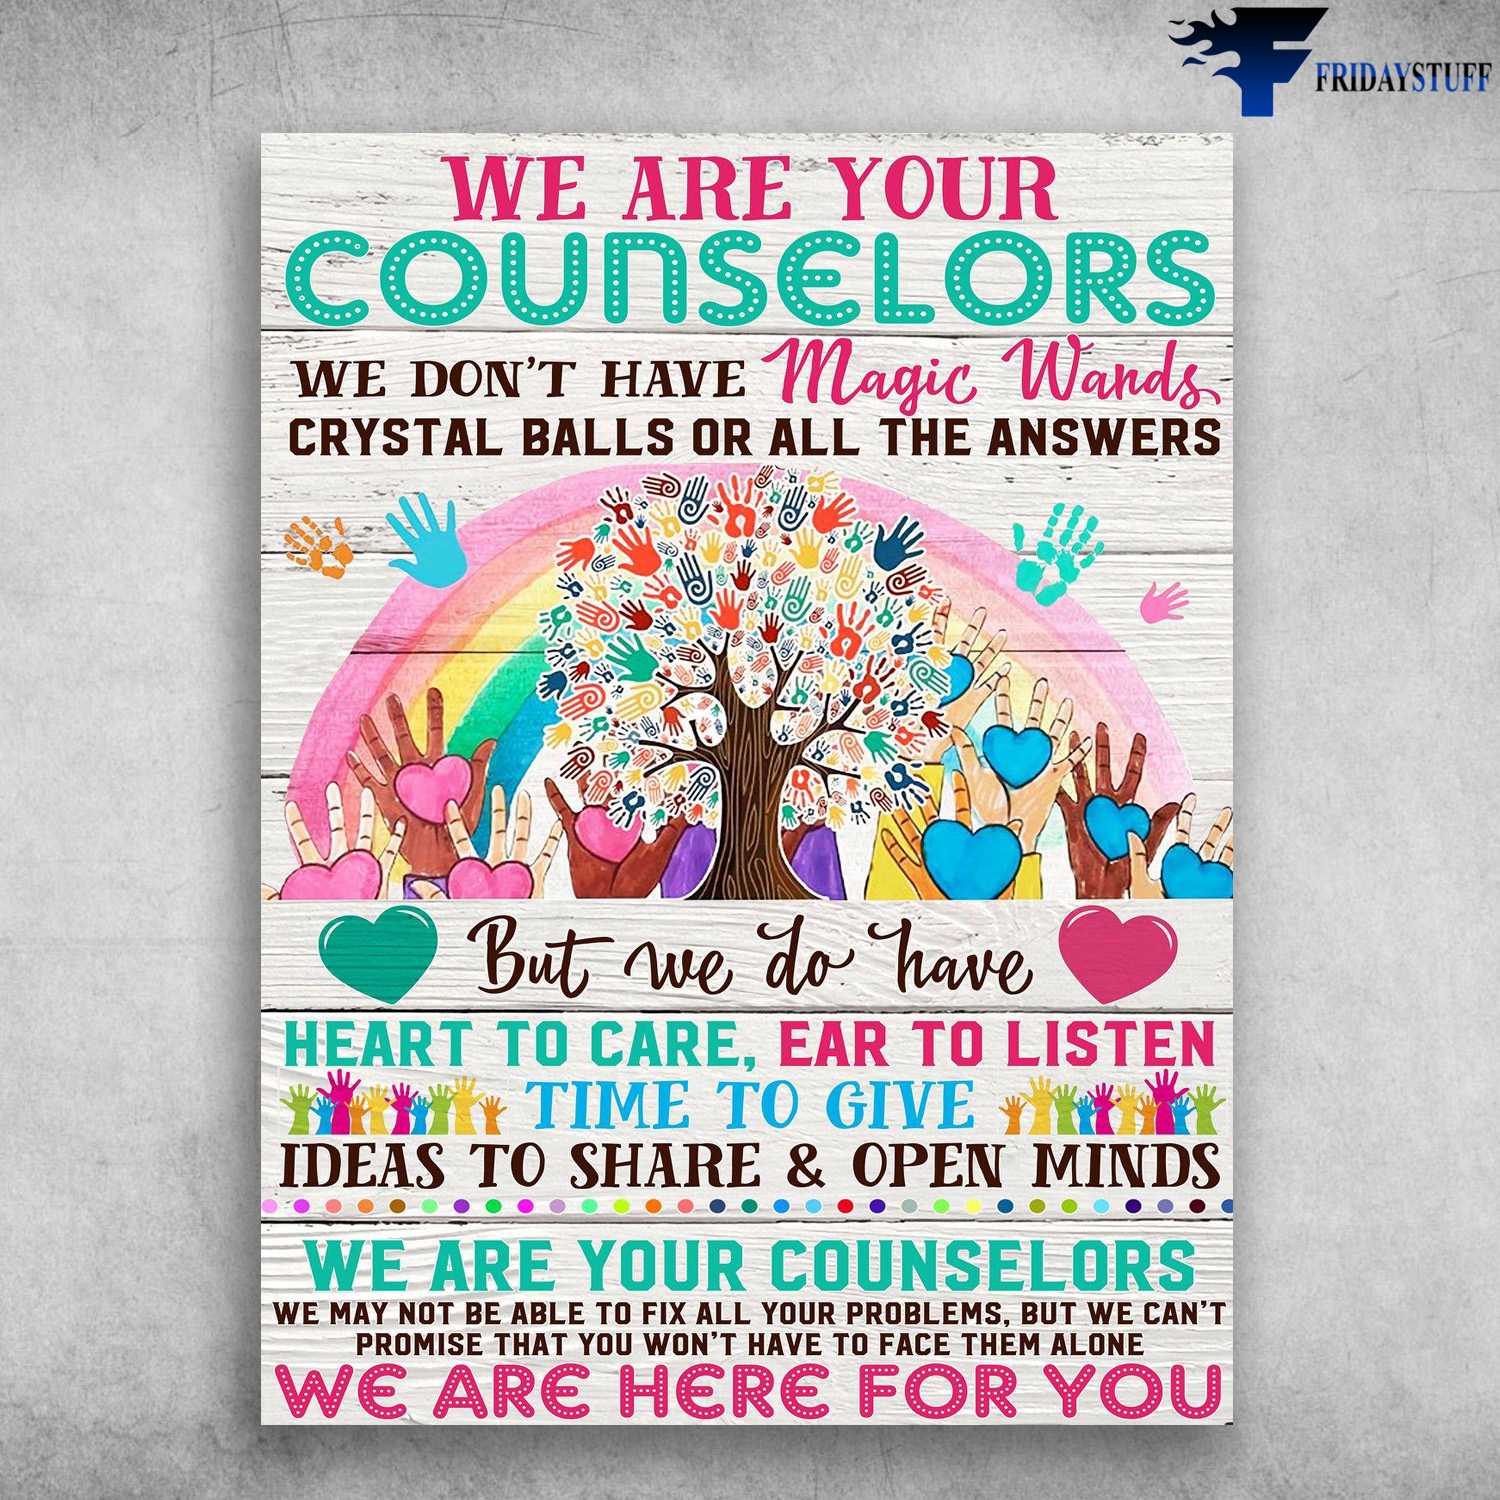 We Are Counselors, We Don't Have Magic Wands, Crystal Balls Or Al The Ansewrs, But We Do Have, Heart To Care, Ear To Listen, We Here For You